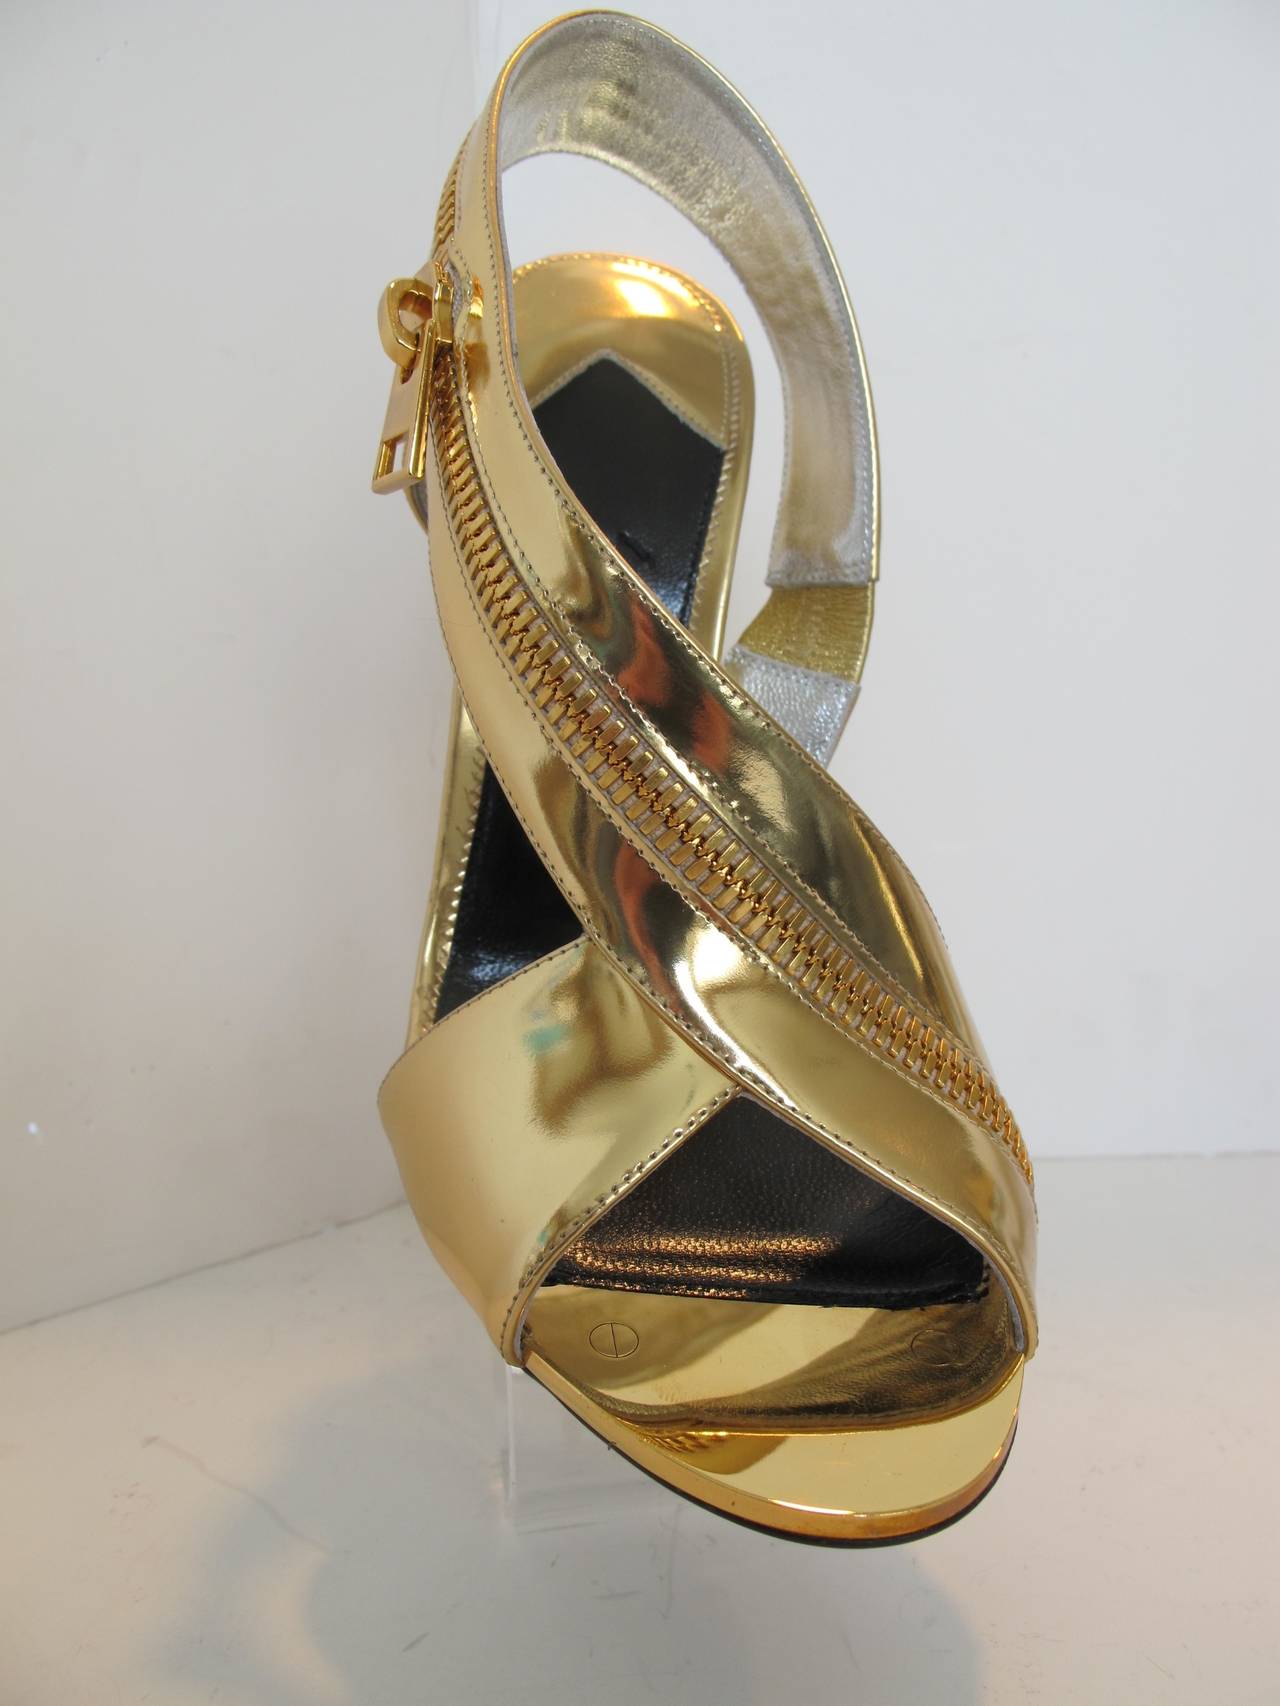 Women's 2014 Tom Ford Gold Sling Back Sandal with Wrap Around Zipper For Sale